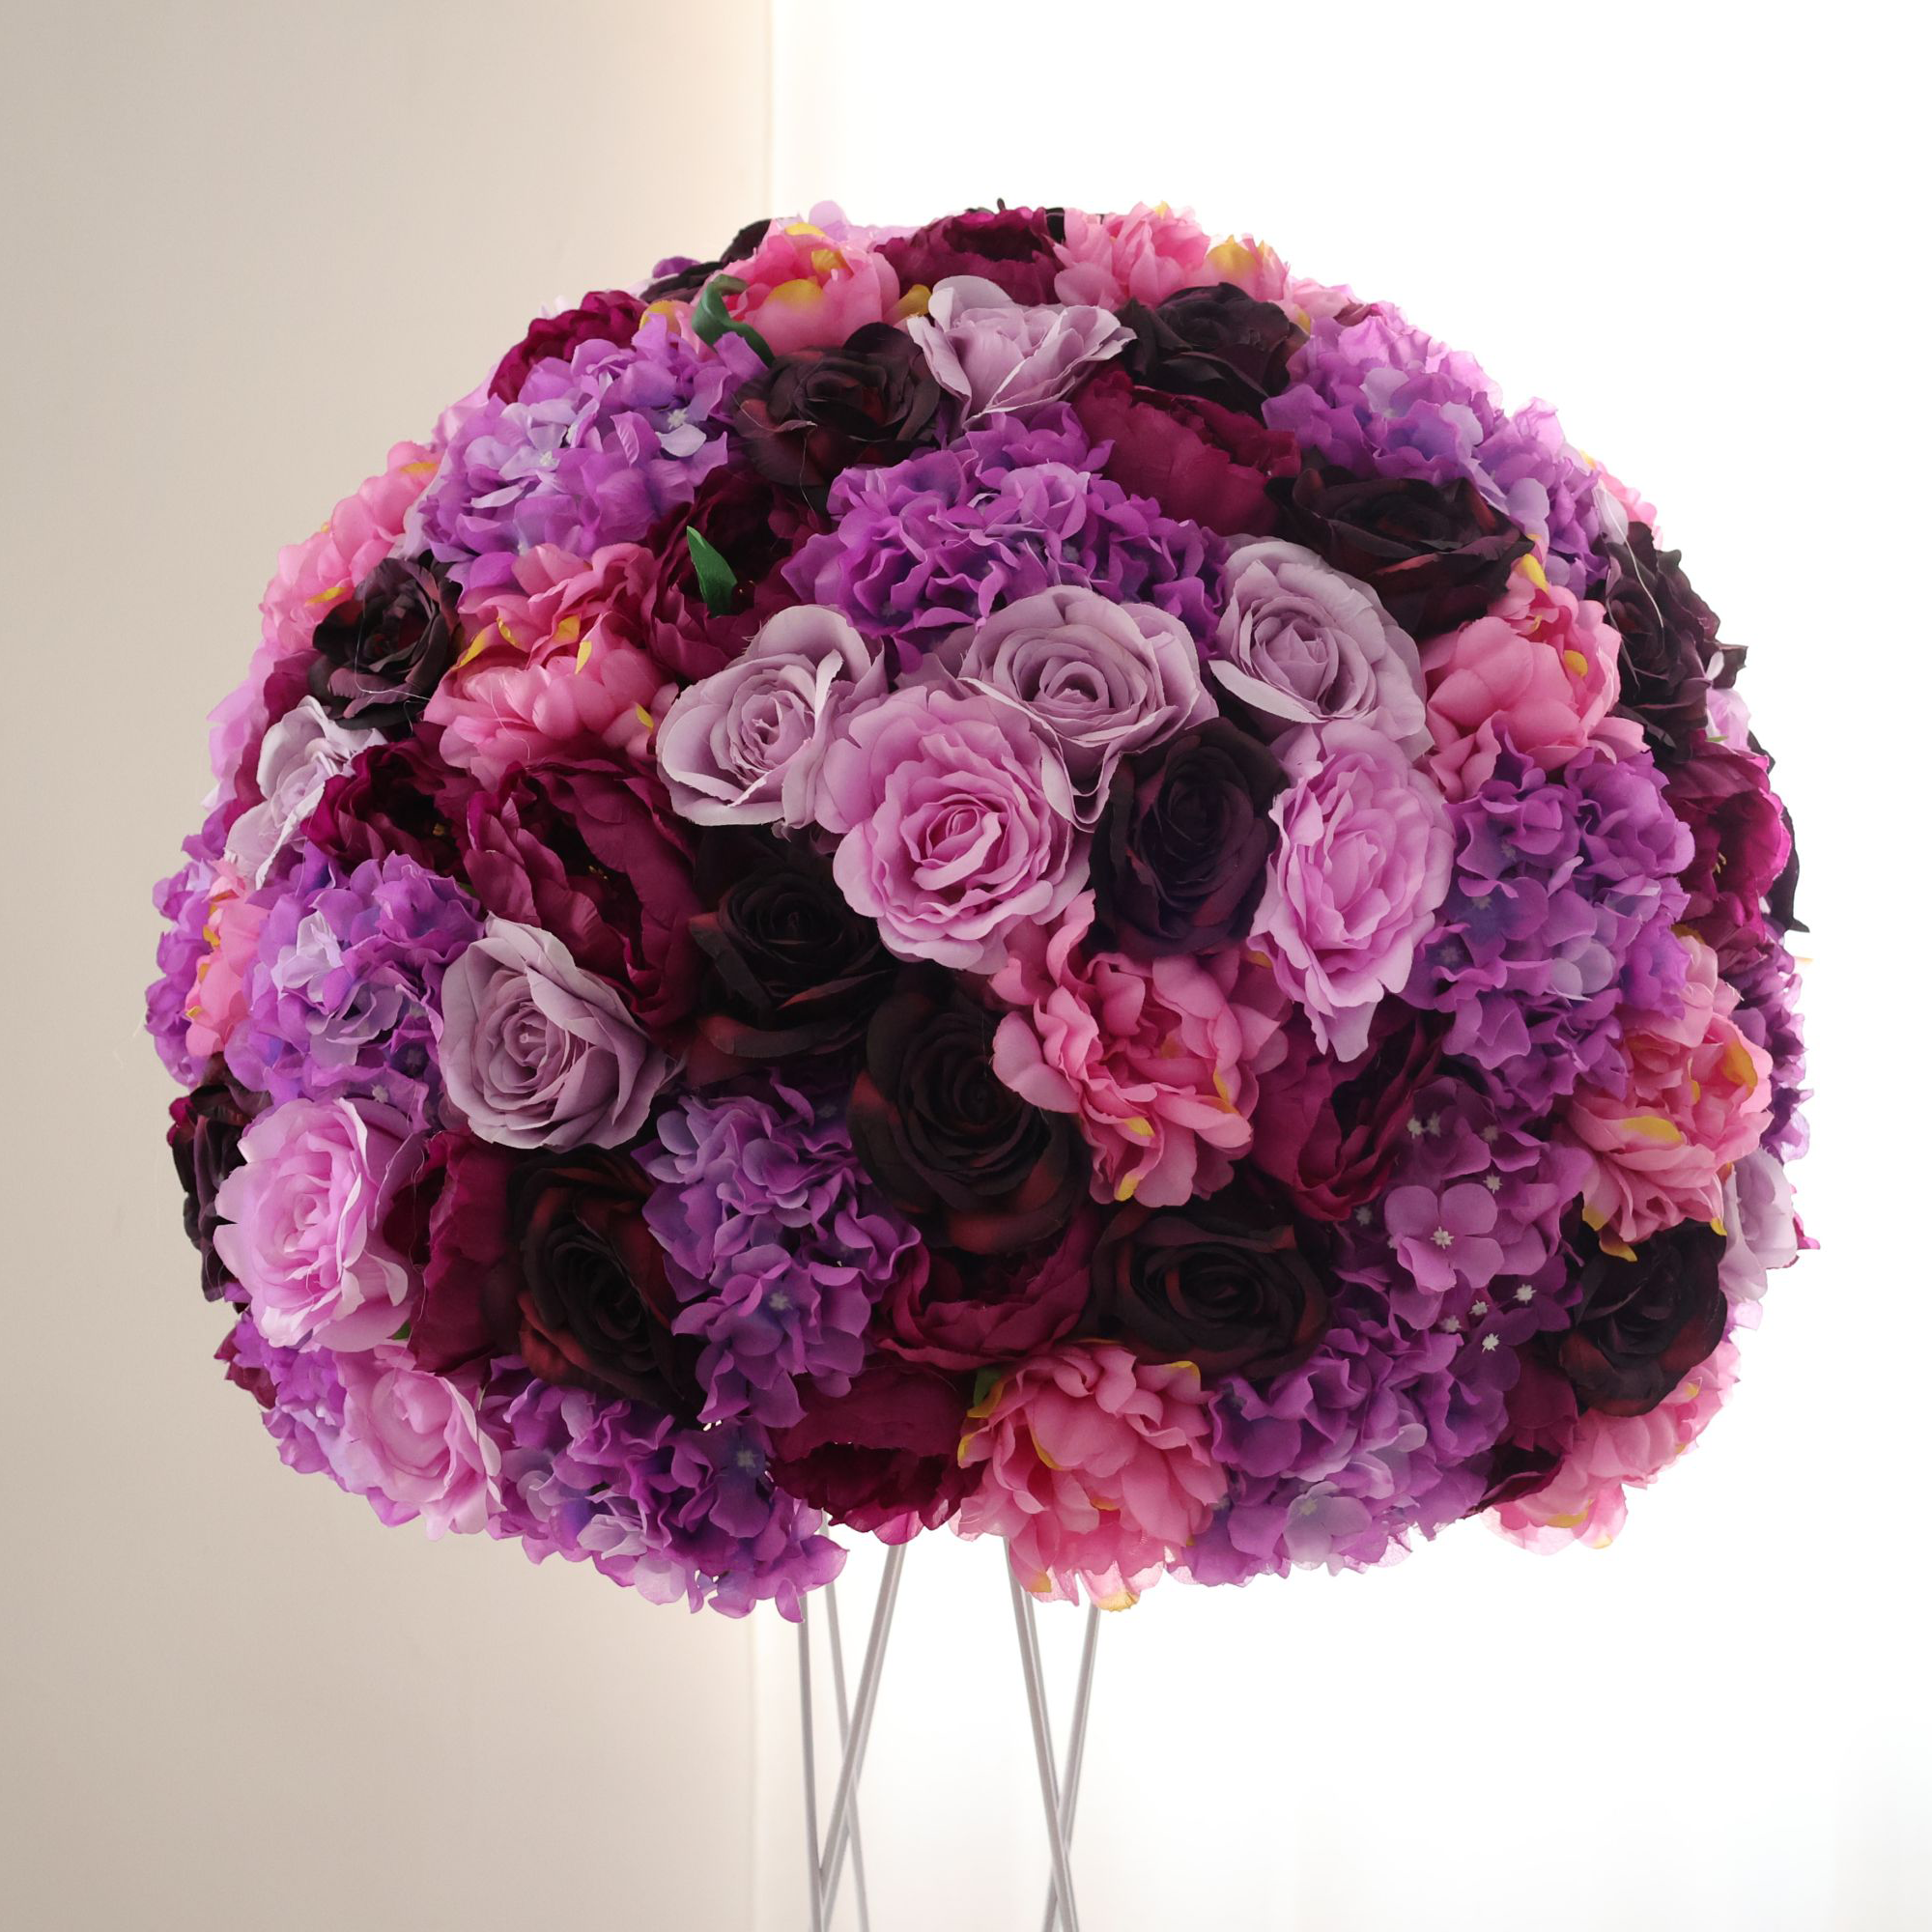 Purple/Pink Majesty - Romantic of Pink/Purple Roses in Full Bloom FB-070